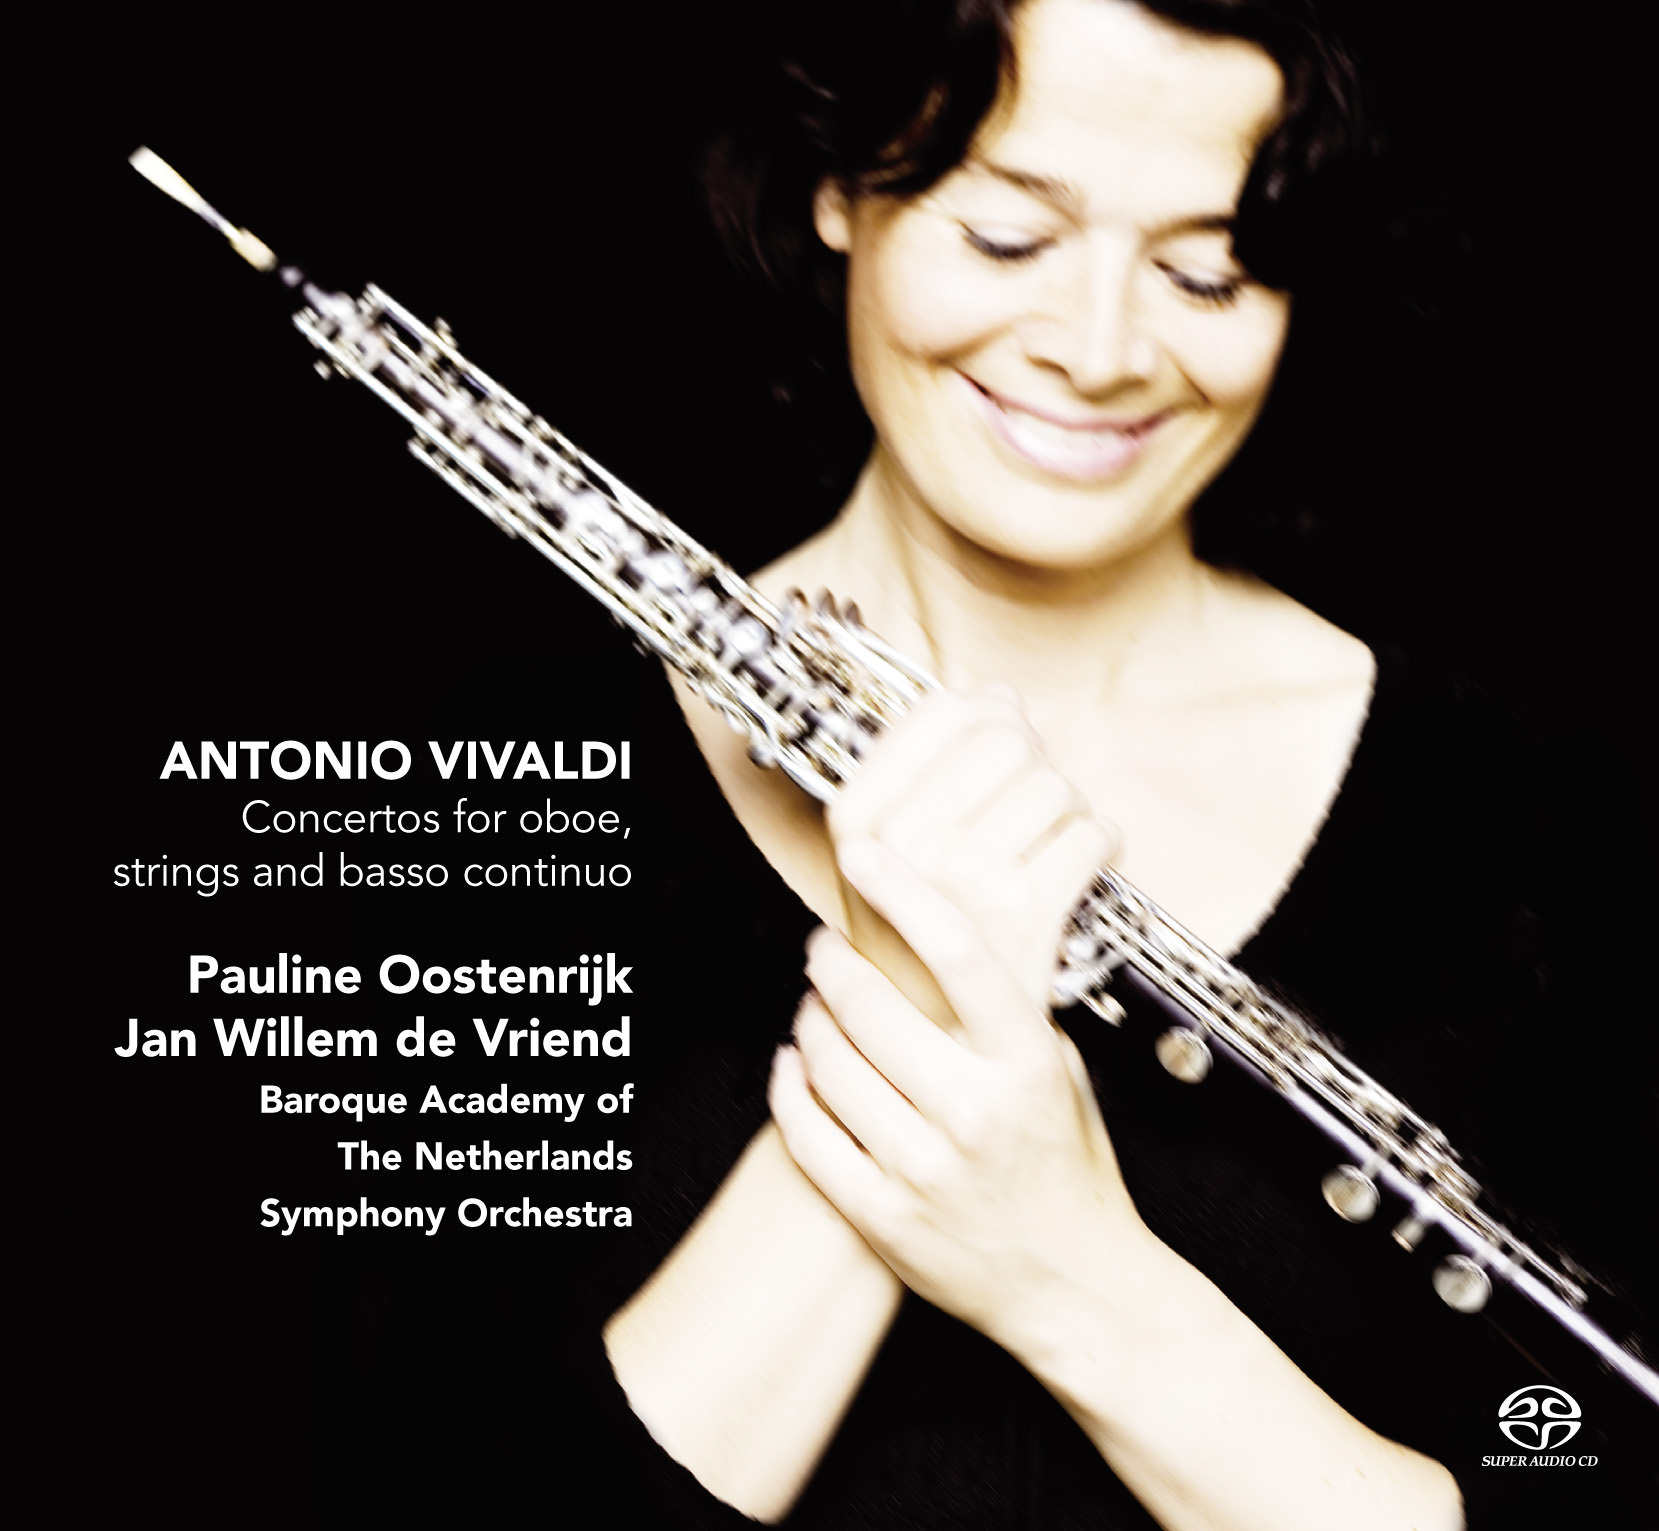 Pauline Oostenrijk, Baroque Academy Of The Netherlands Symphony Orchestra, Jan Willem de Vriend – Vivaldi: Concertos For Oboe, Strings And Basso Continuo (2010) DSF DSD128